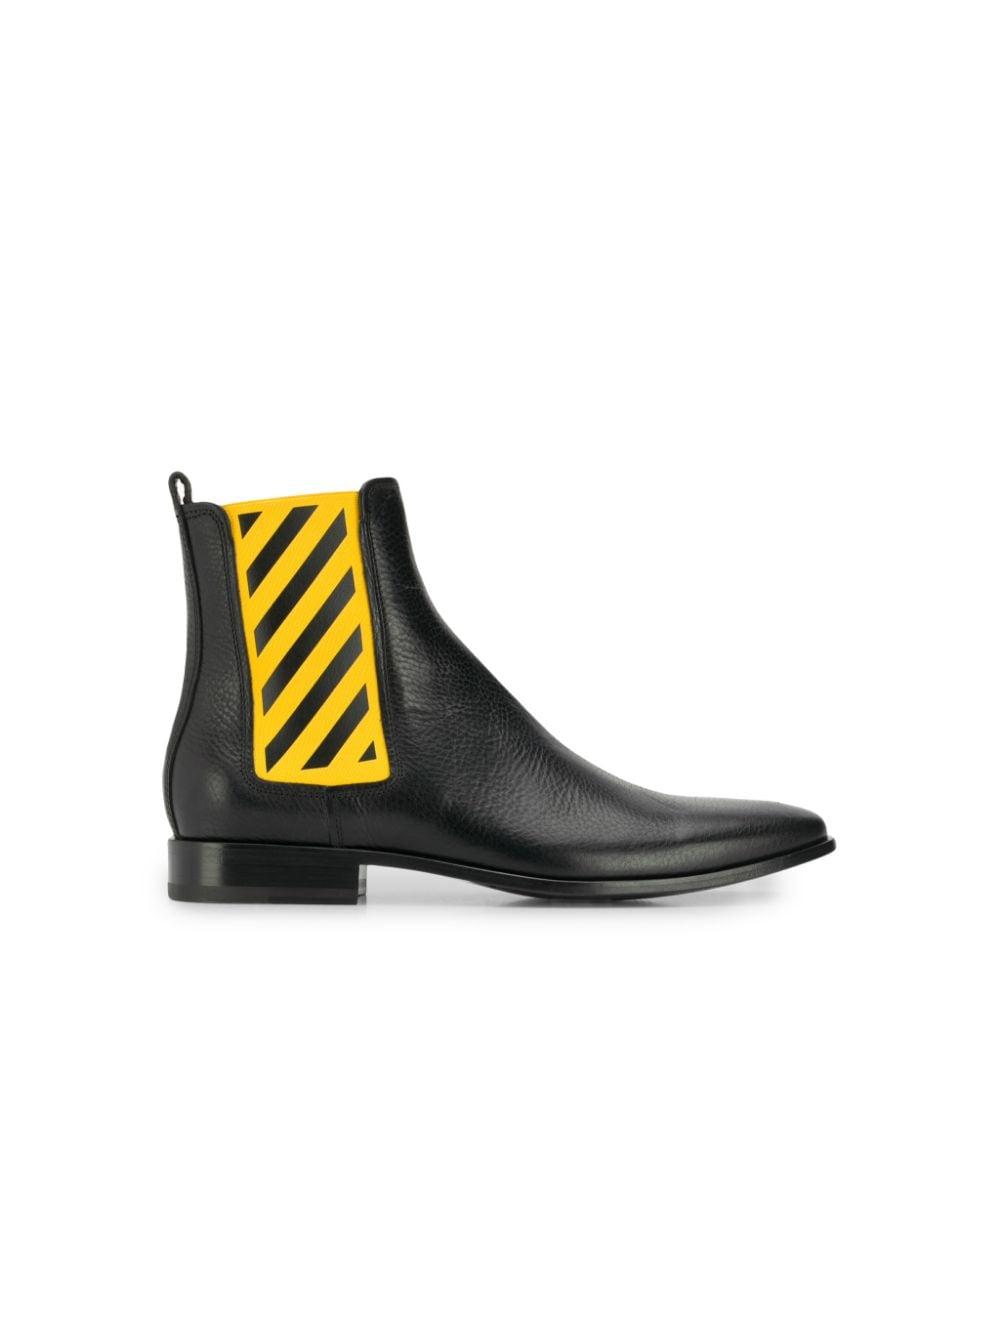 Off-White c/o Virgil Abloh Leather Black And Yellow Chelsea Boots for Men |  Lyst